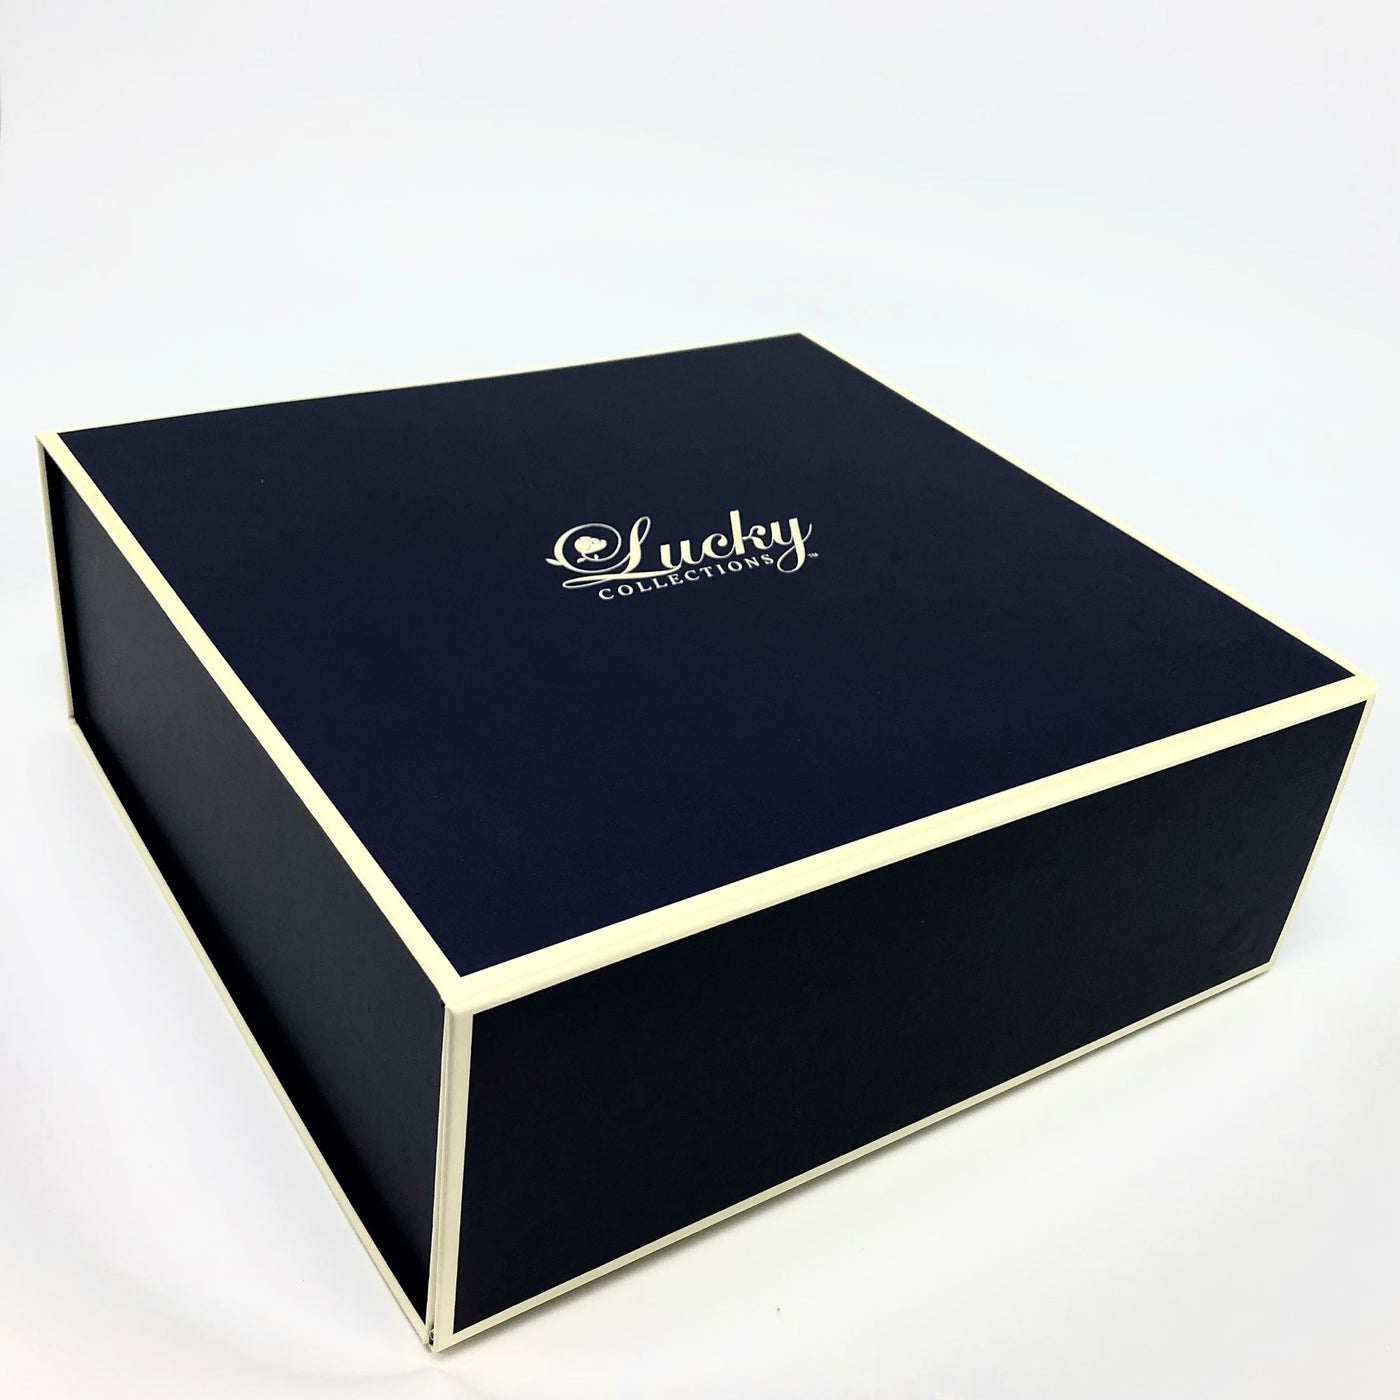 Lucky Collections ™ Tiaras come in Custom Box for convenient presentation & keepsake.